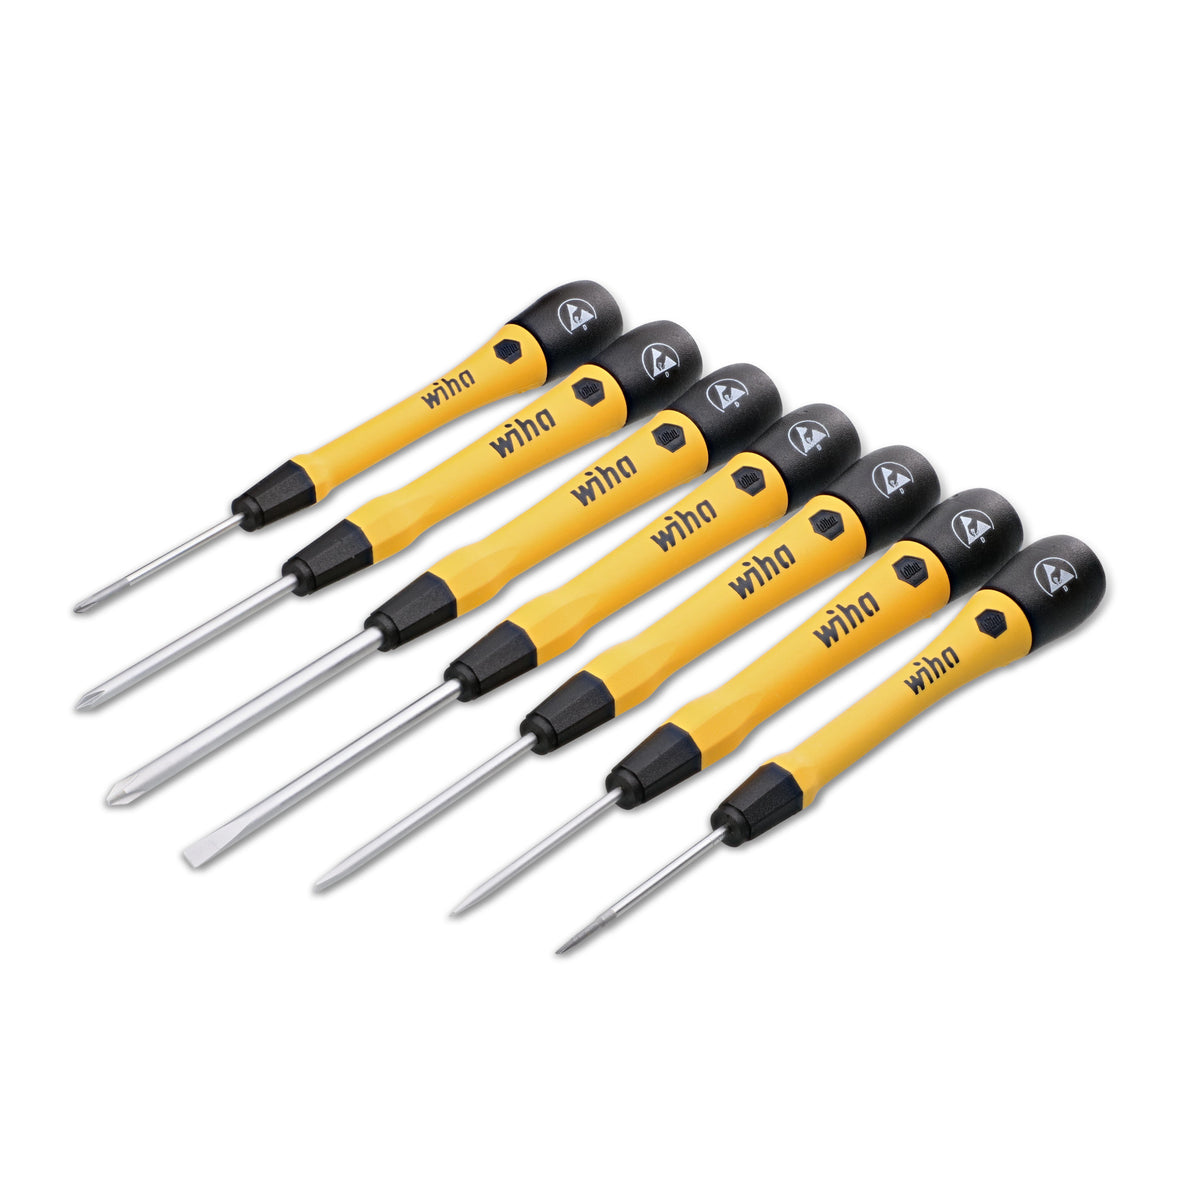 Wiha 27392 7 Piece ESD Safe Picofinish Precision Slotted and Phillps Screwdriver Set